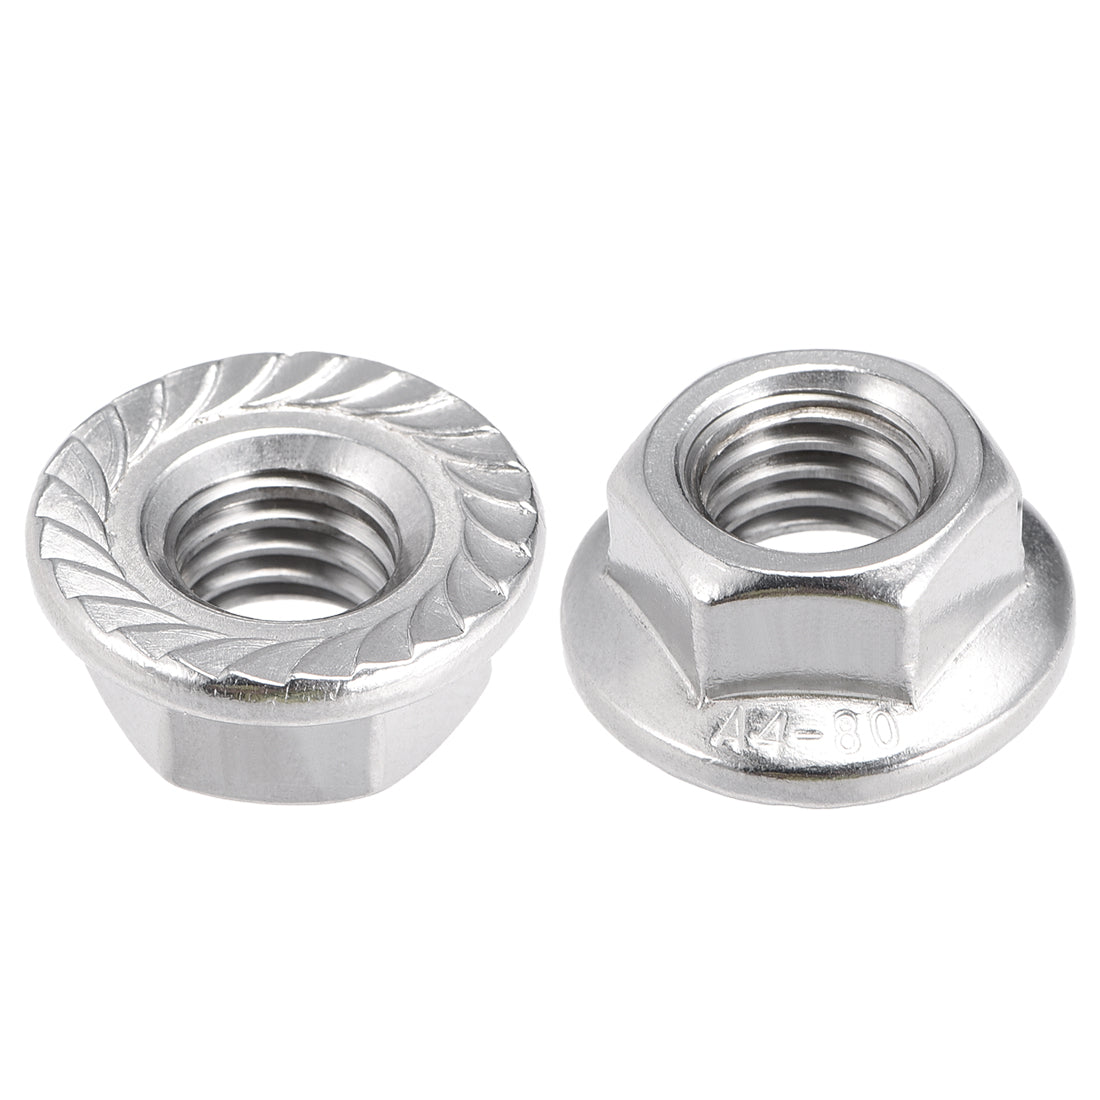 Uxcell Uxcell M12 Serrated Flange Hex Lock Nuts, 316 Stainless Steel, 2 Pcs